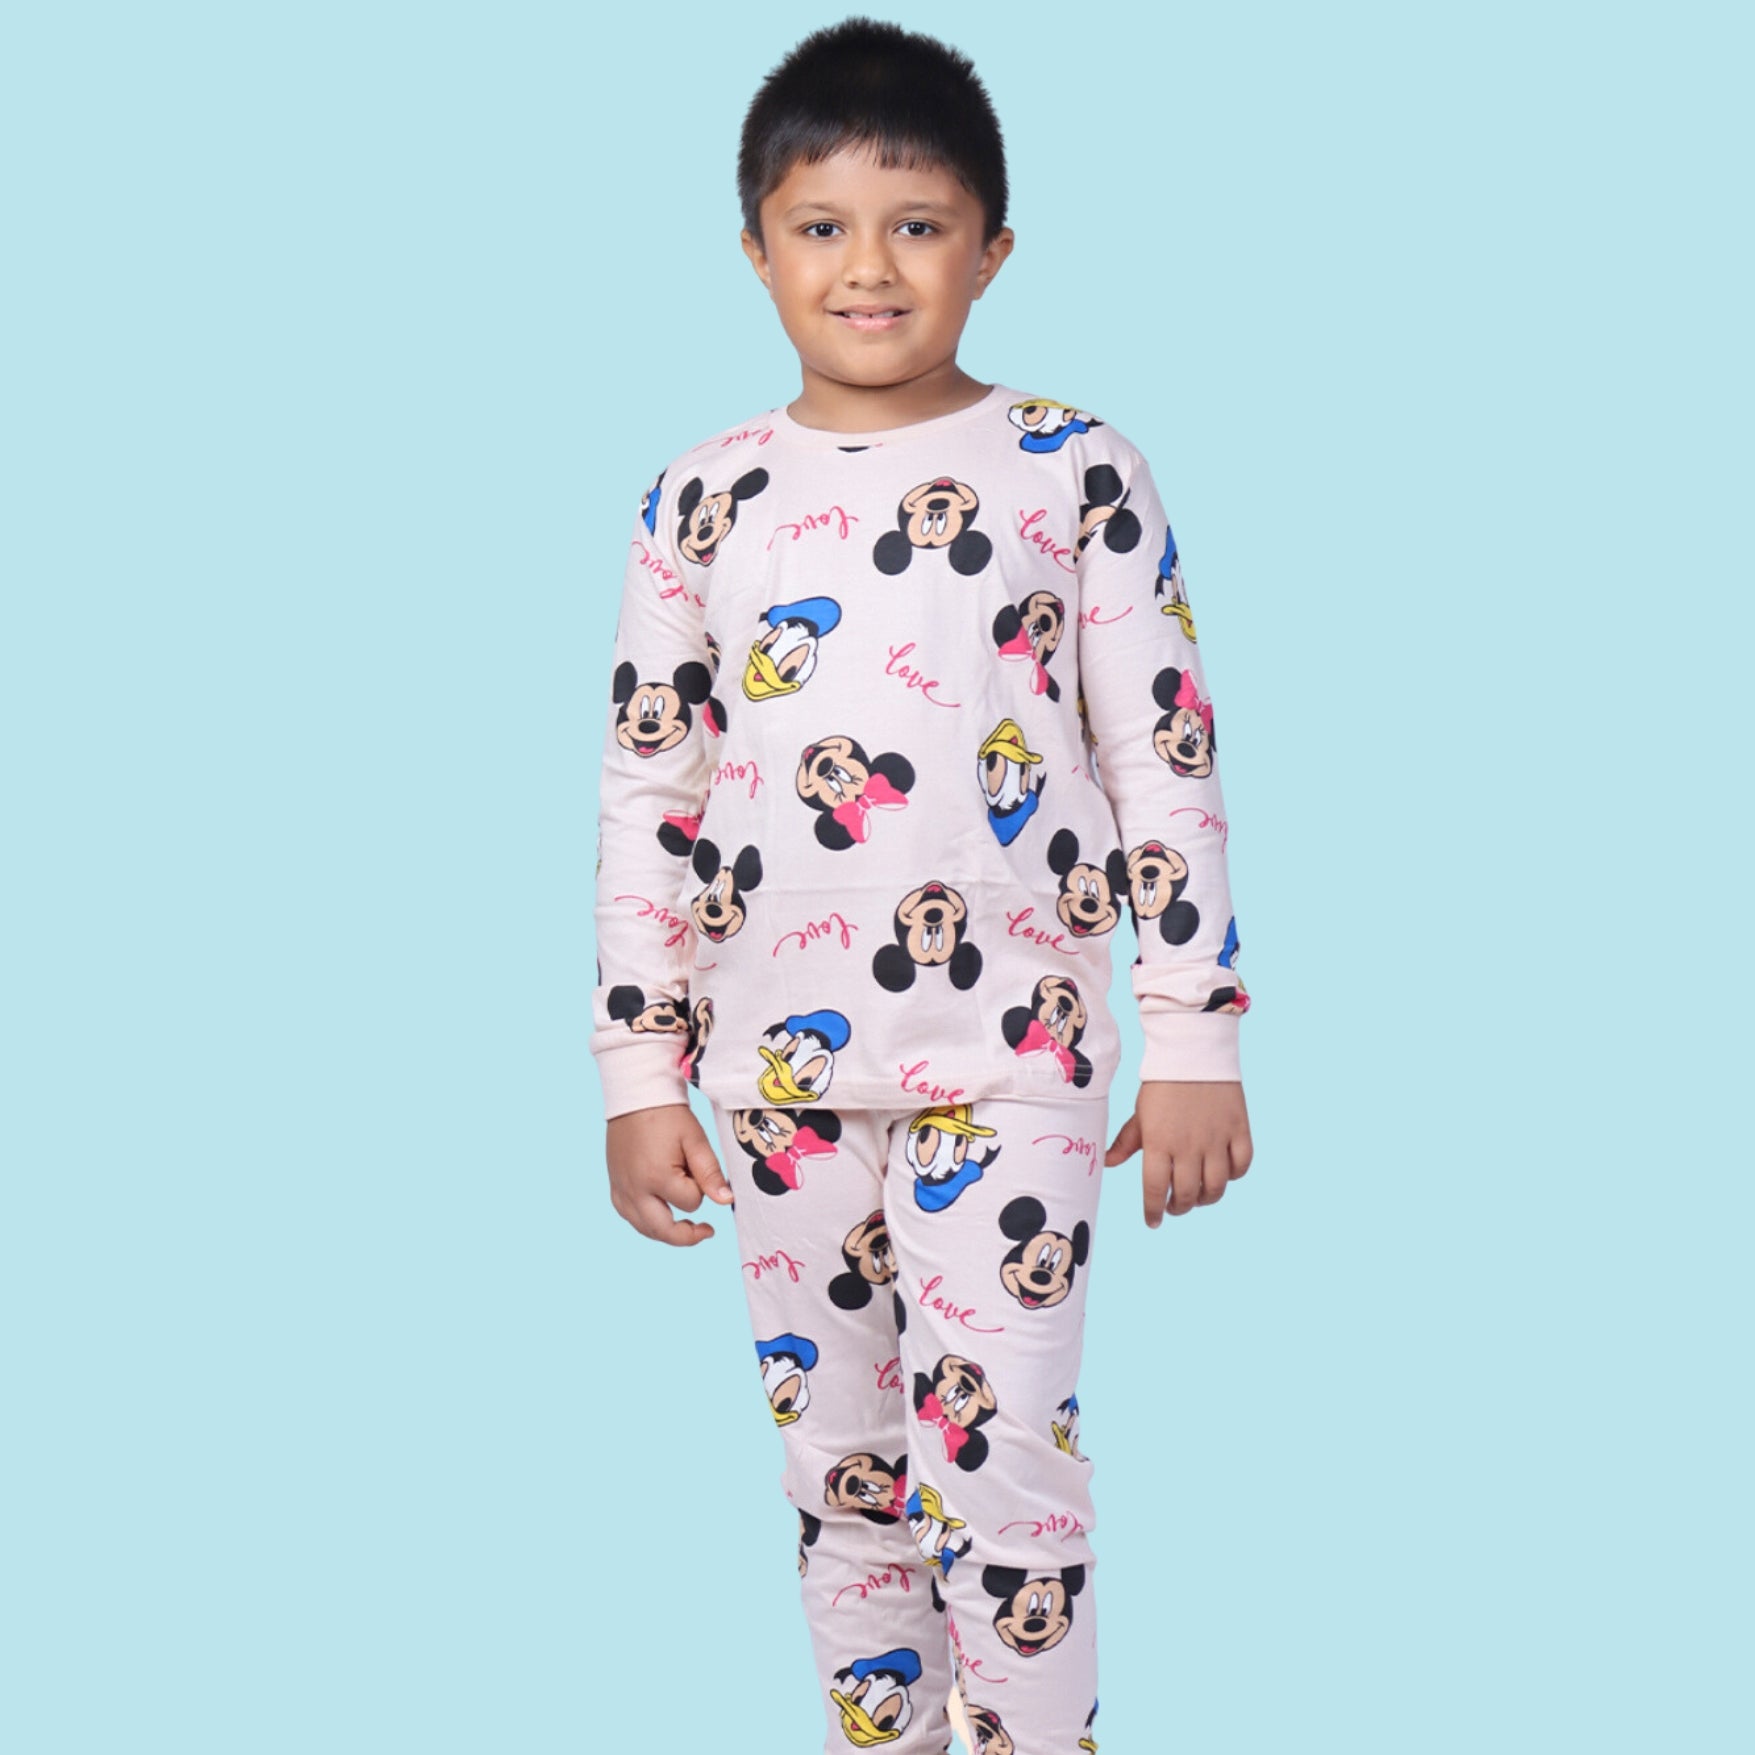 Full Sleeve Night Suit For Boy In Peach Colour - Mickey Minnie